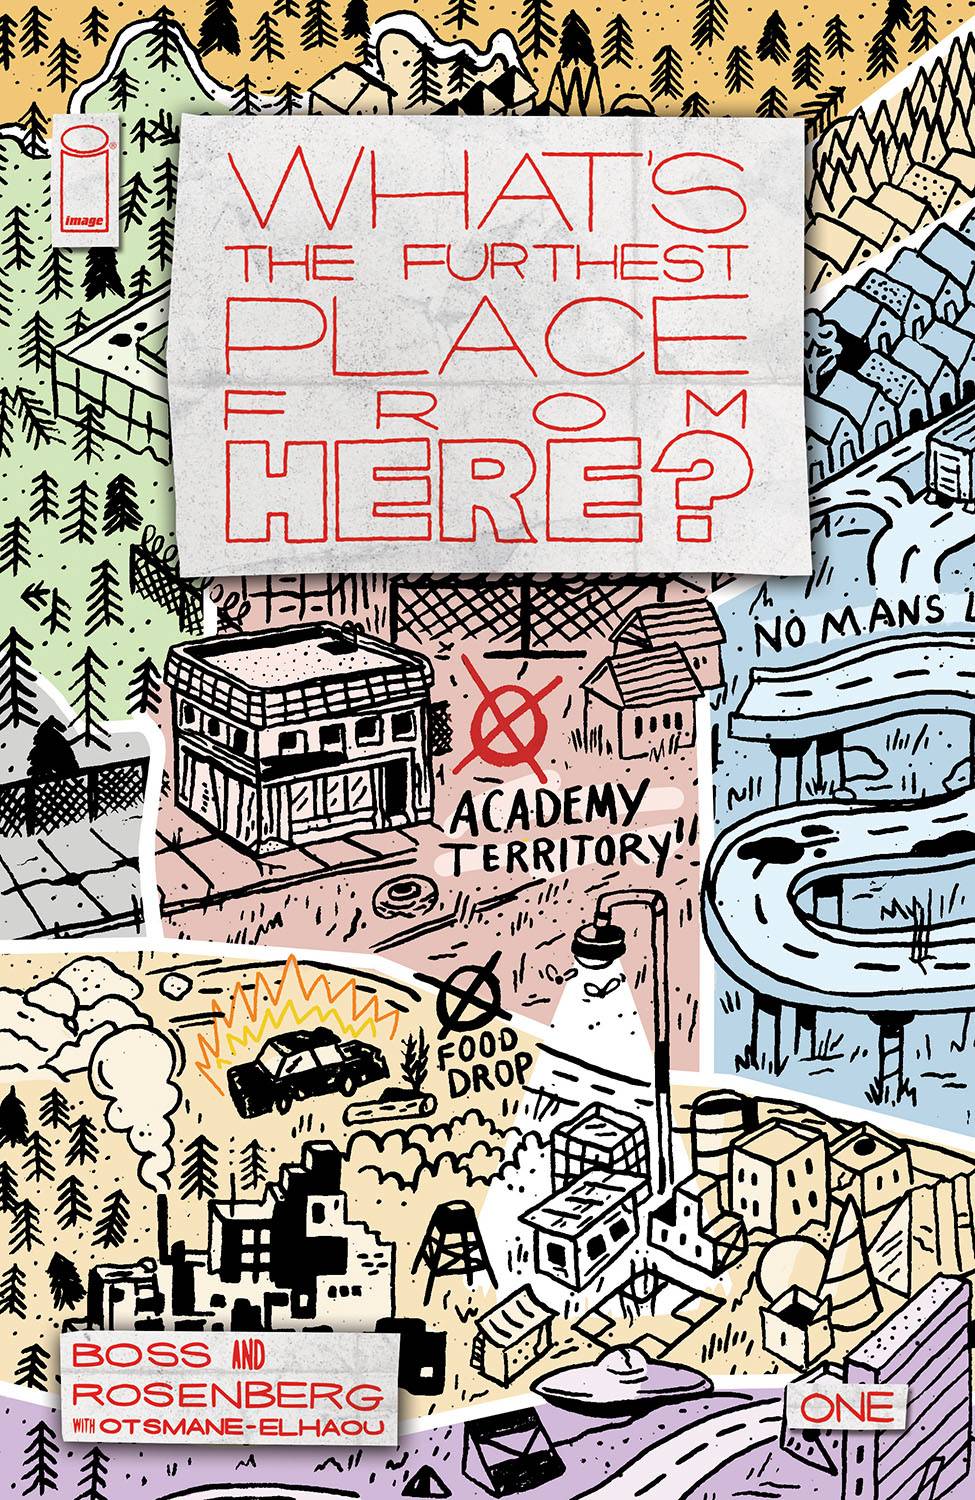 WHAT’S THE FURTHEST PLACE FROM HERE (1/50 Courtney Menard)